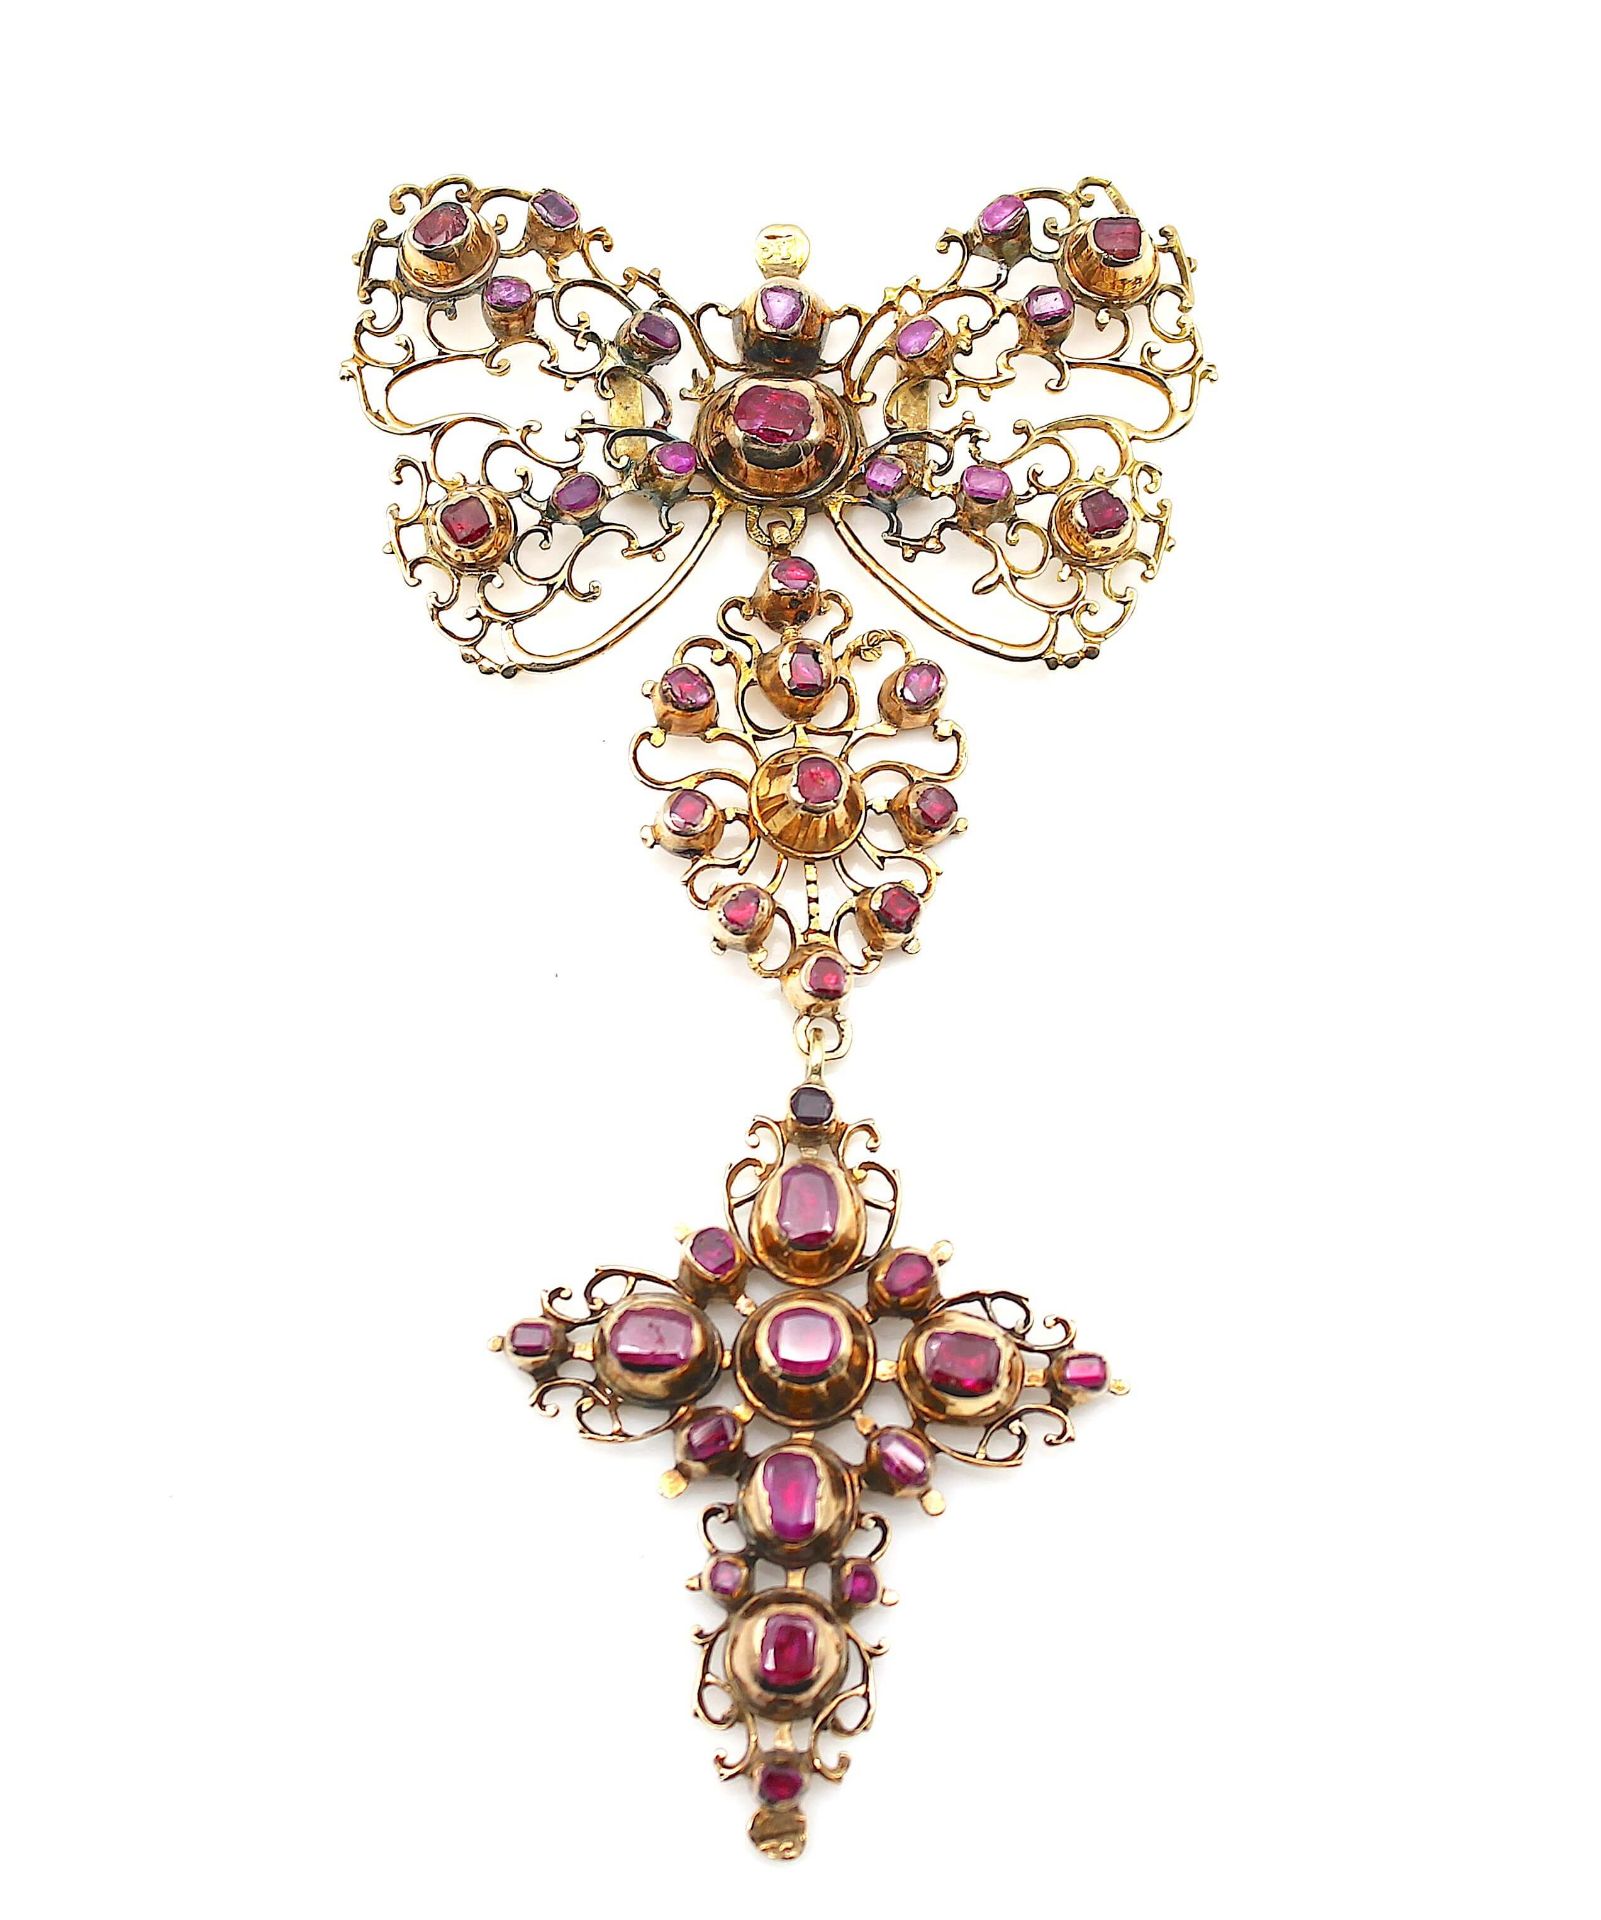 Corsage brooch / pendant around 1750 with sapphires and rubies - Image 2 of 6